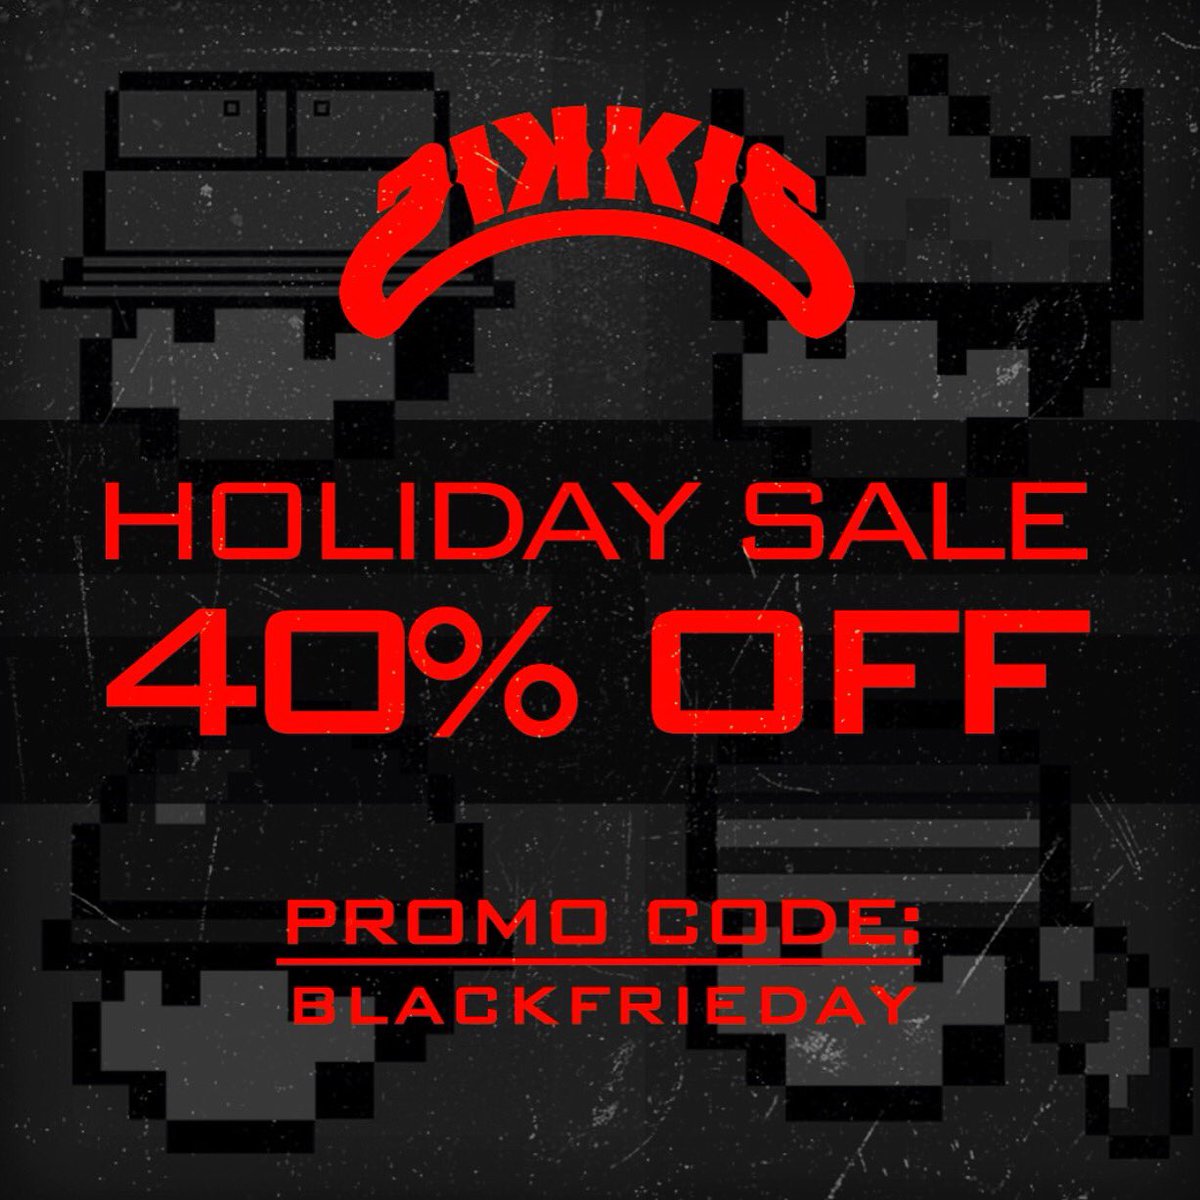 The holiday sale is back up 40% OFF the entire website, use promo code: blackfrieday Sikkisusa.com